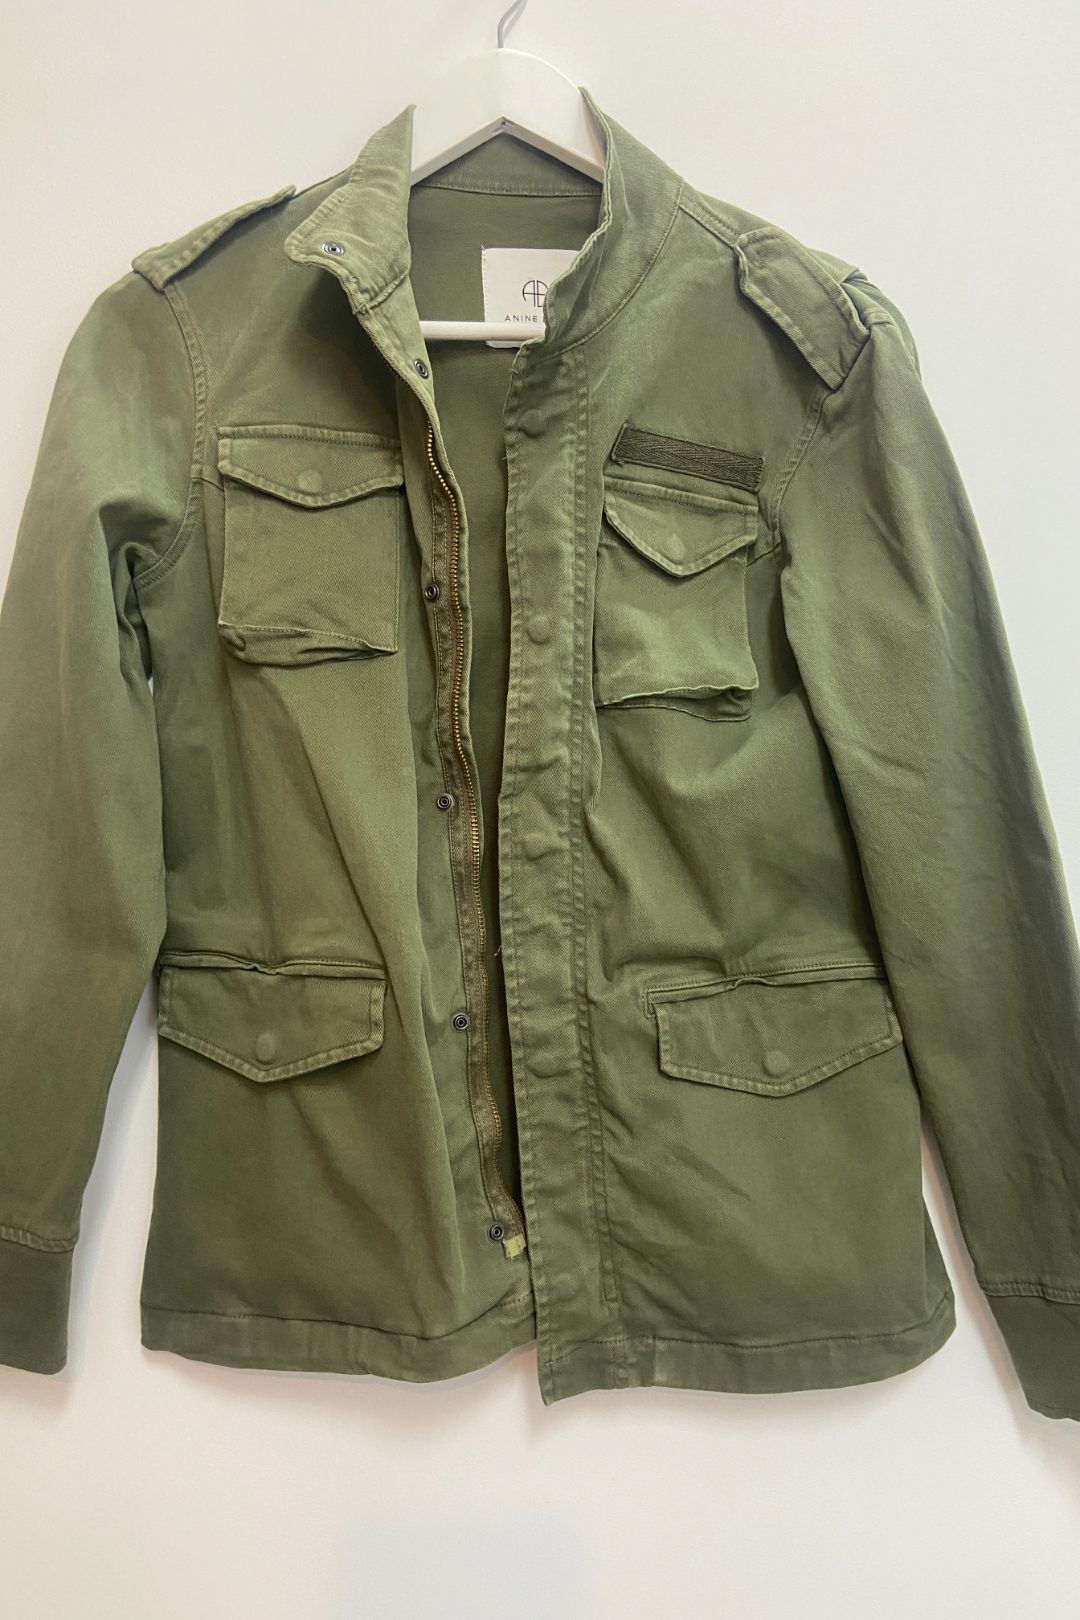 Anine Bing Army Jacket in Military Green